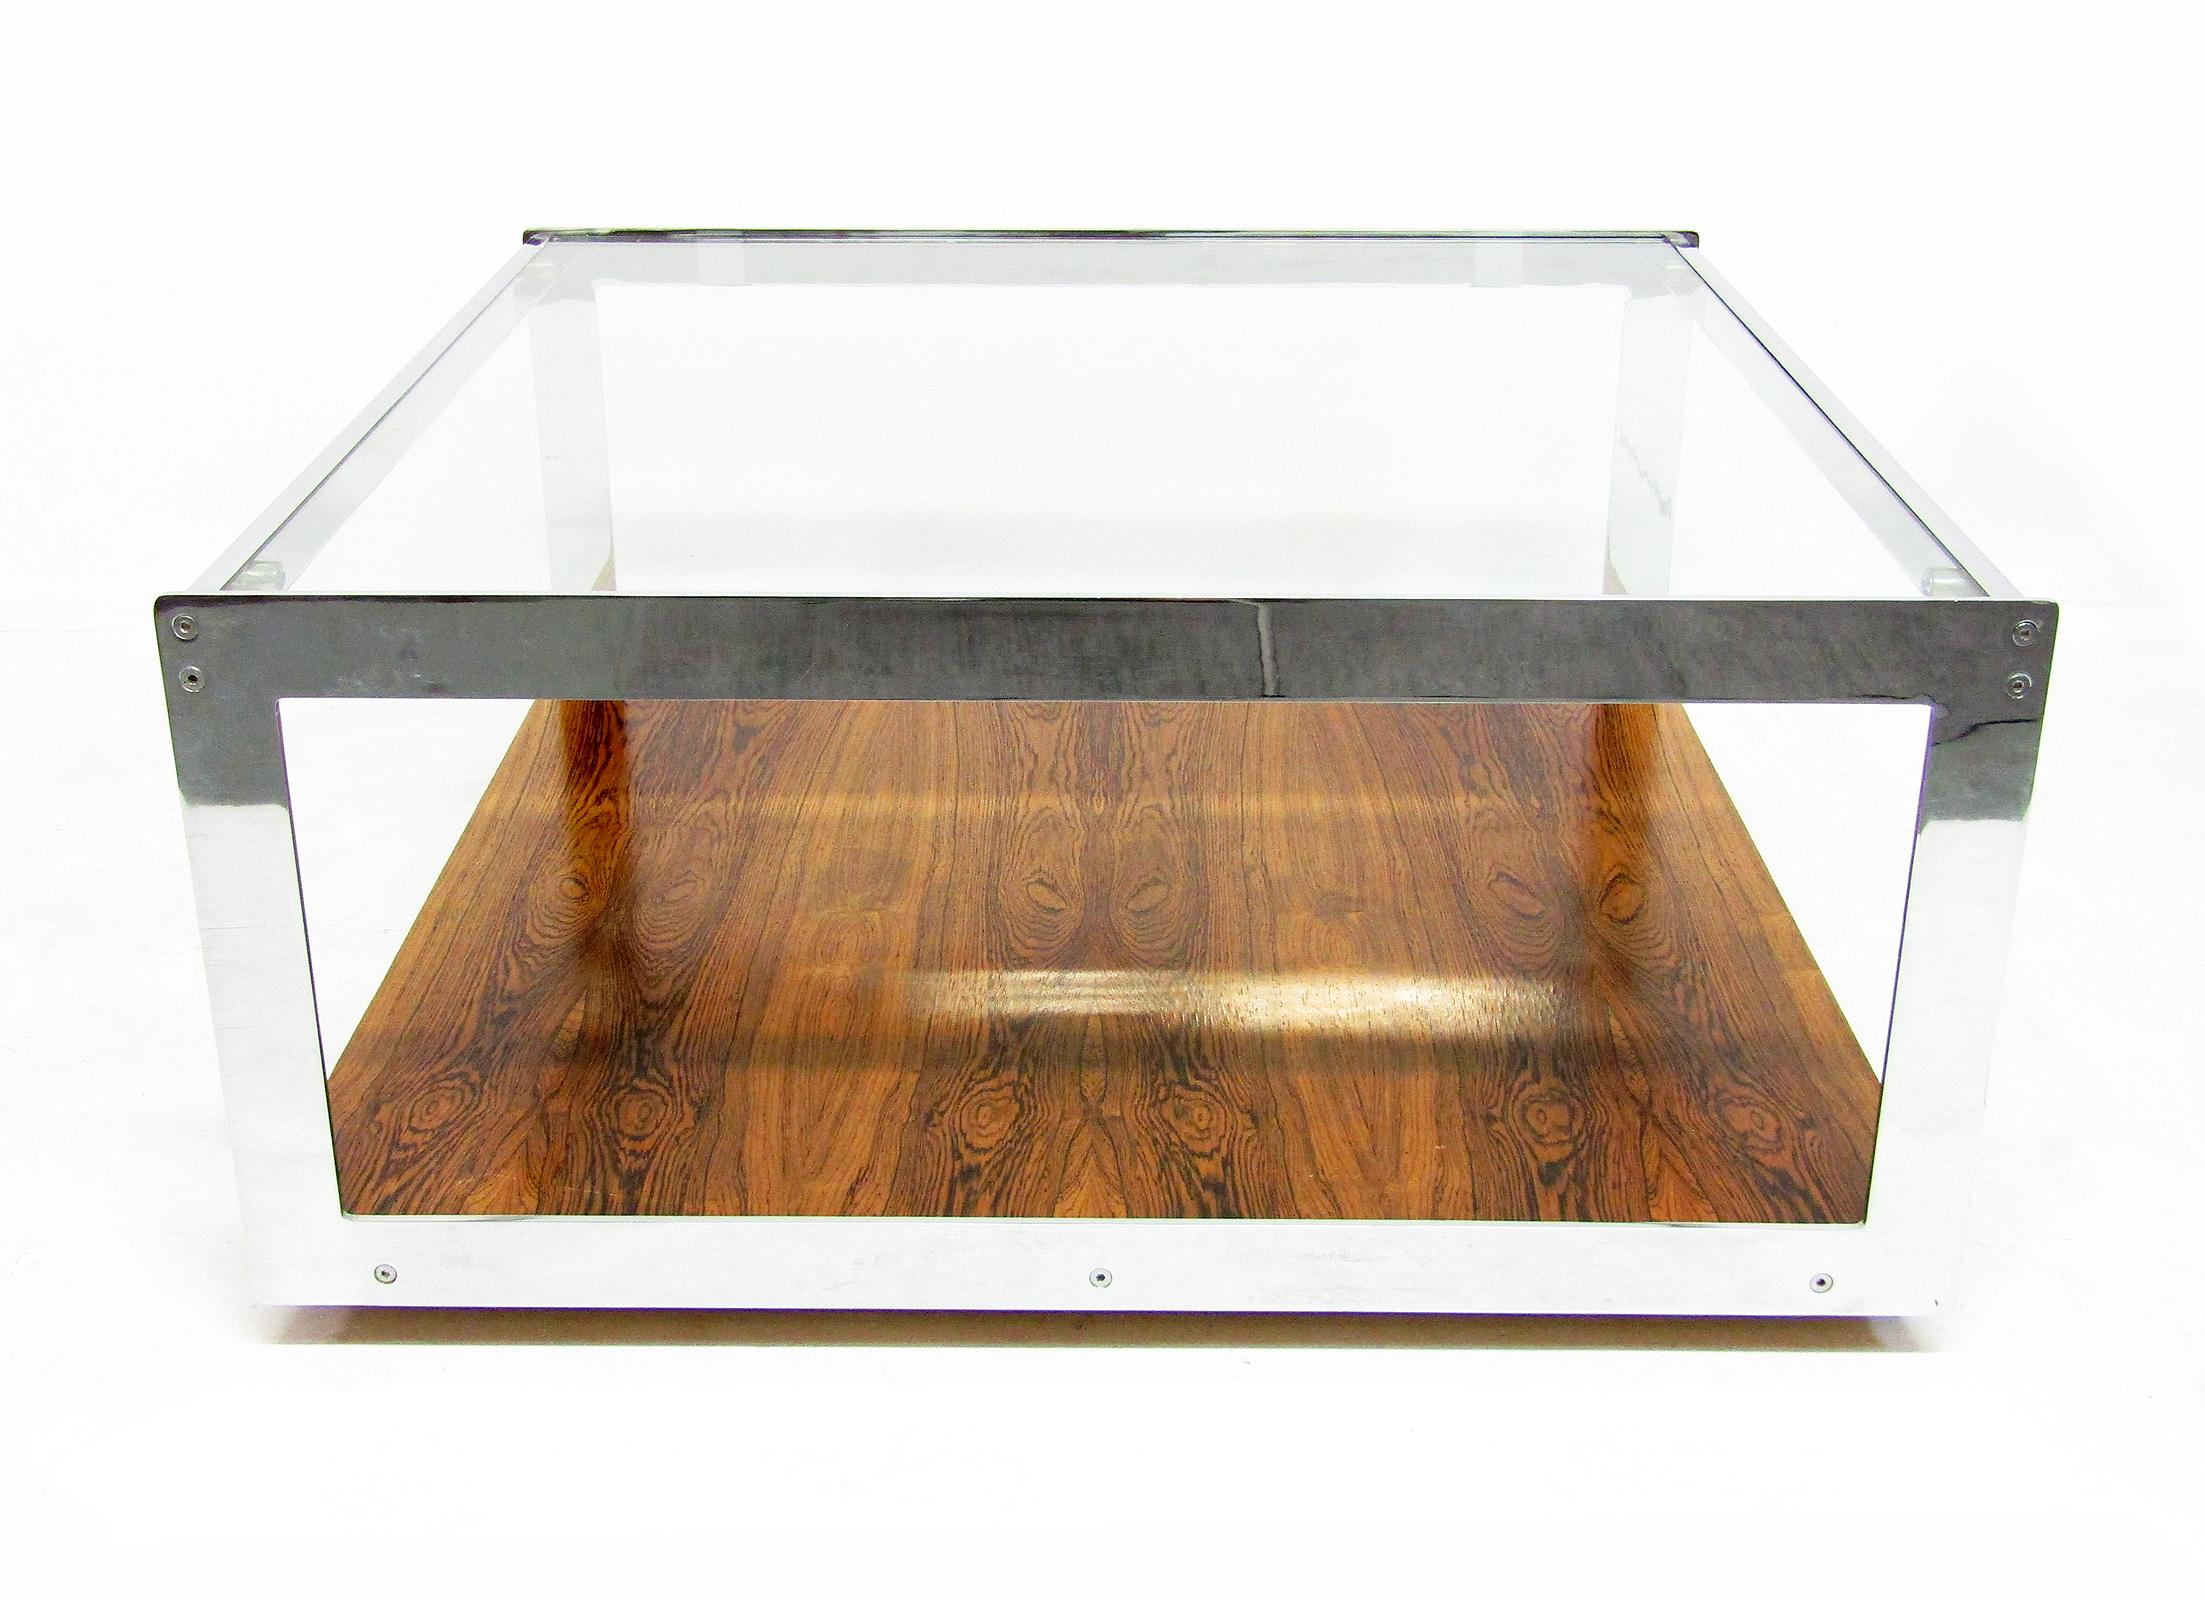 A large 1970s centre coffee table in rosewood veneer and chrome frame by Richard Young for Merrow Associates.

This wonderful slab of minimalism is the larger size of center tables made by Merrow. It slides easily on smooth casters.

The rosewood